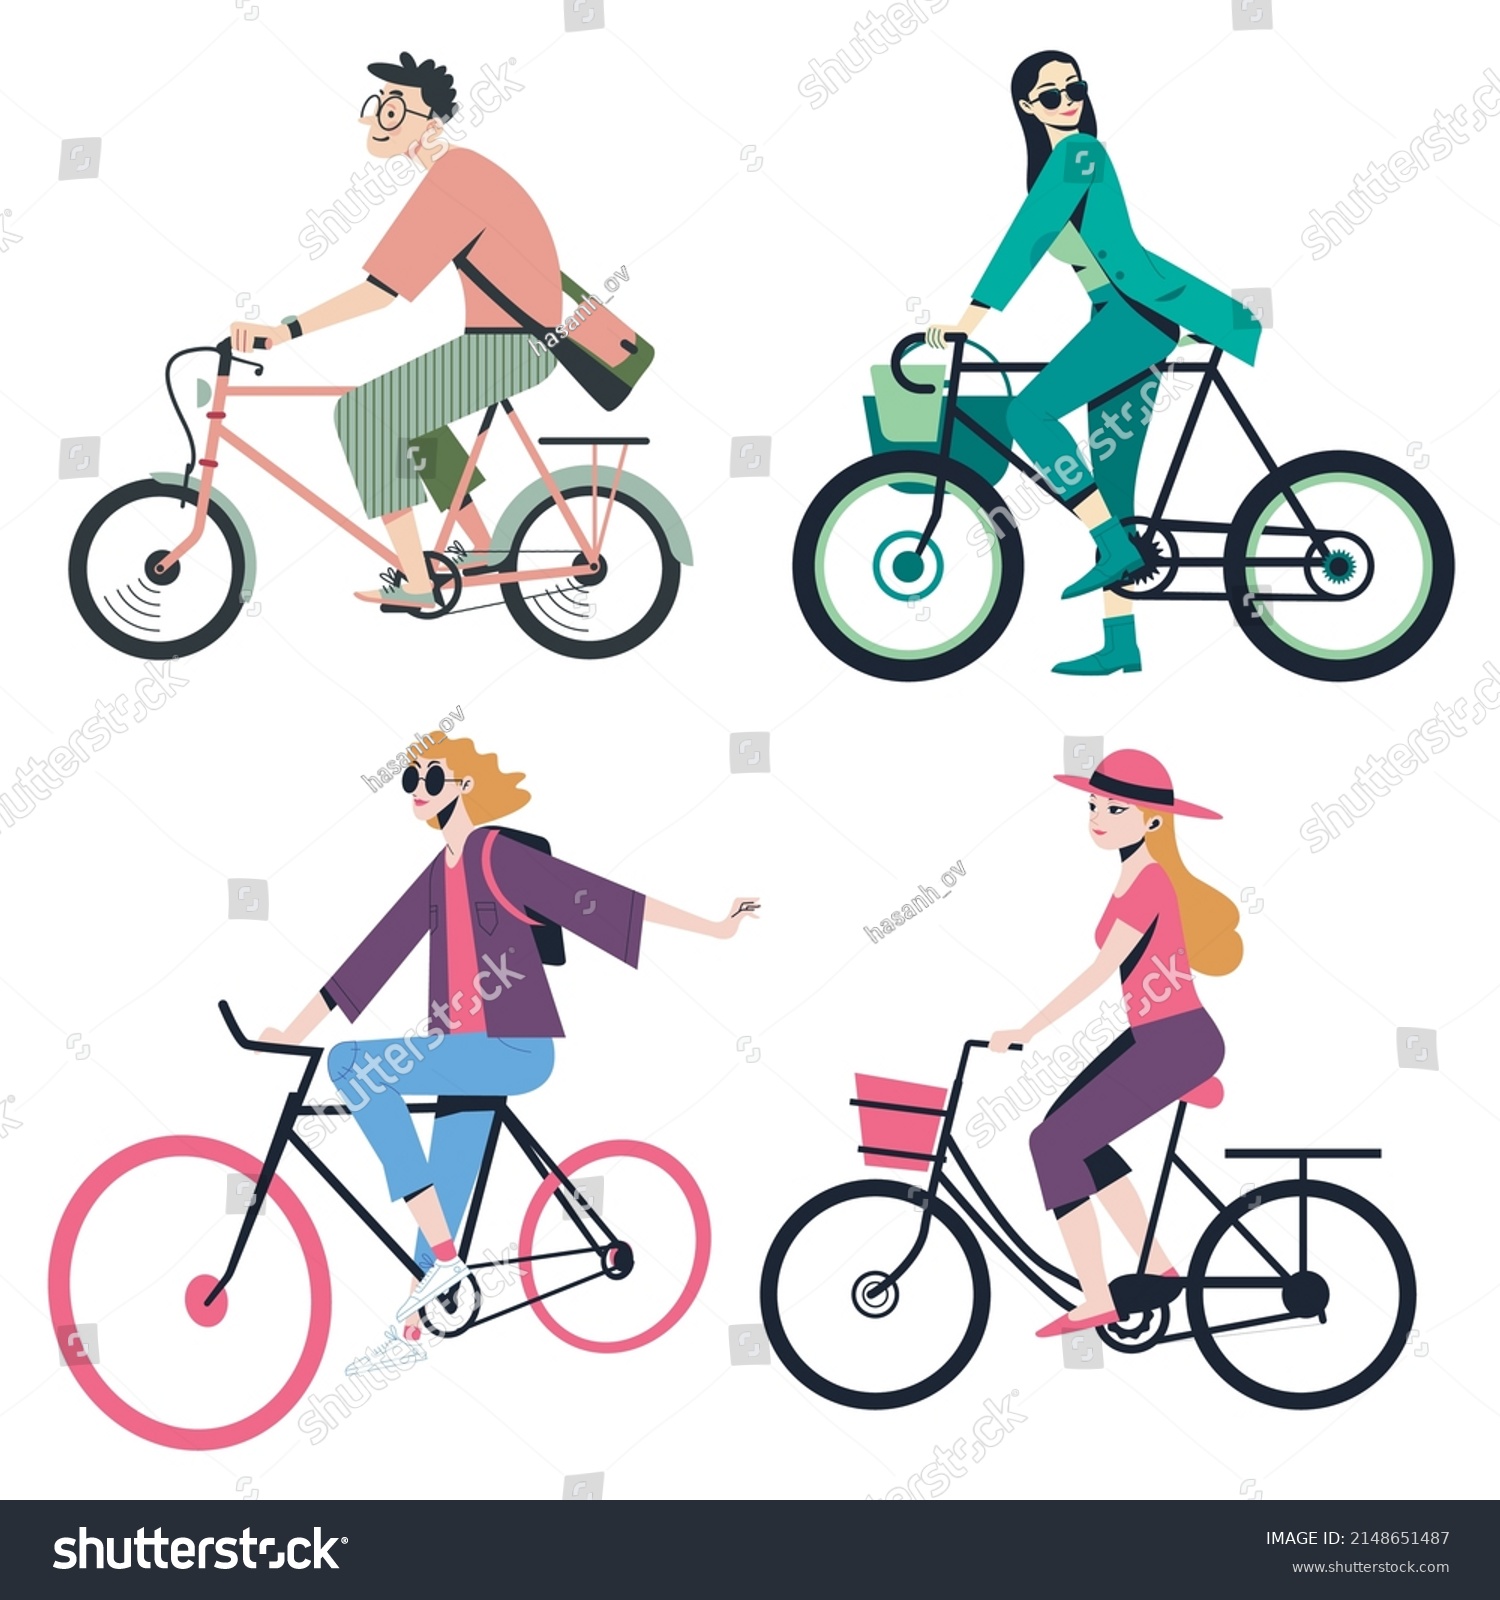 SVG of Lifestyle Icons Bicycle Riding Sketch Cartoon Characters SVG svg